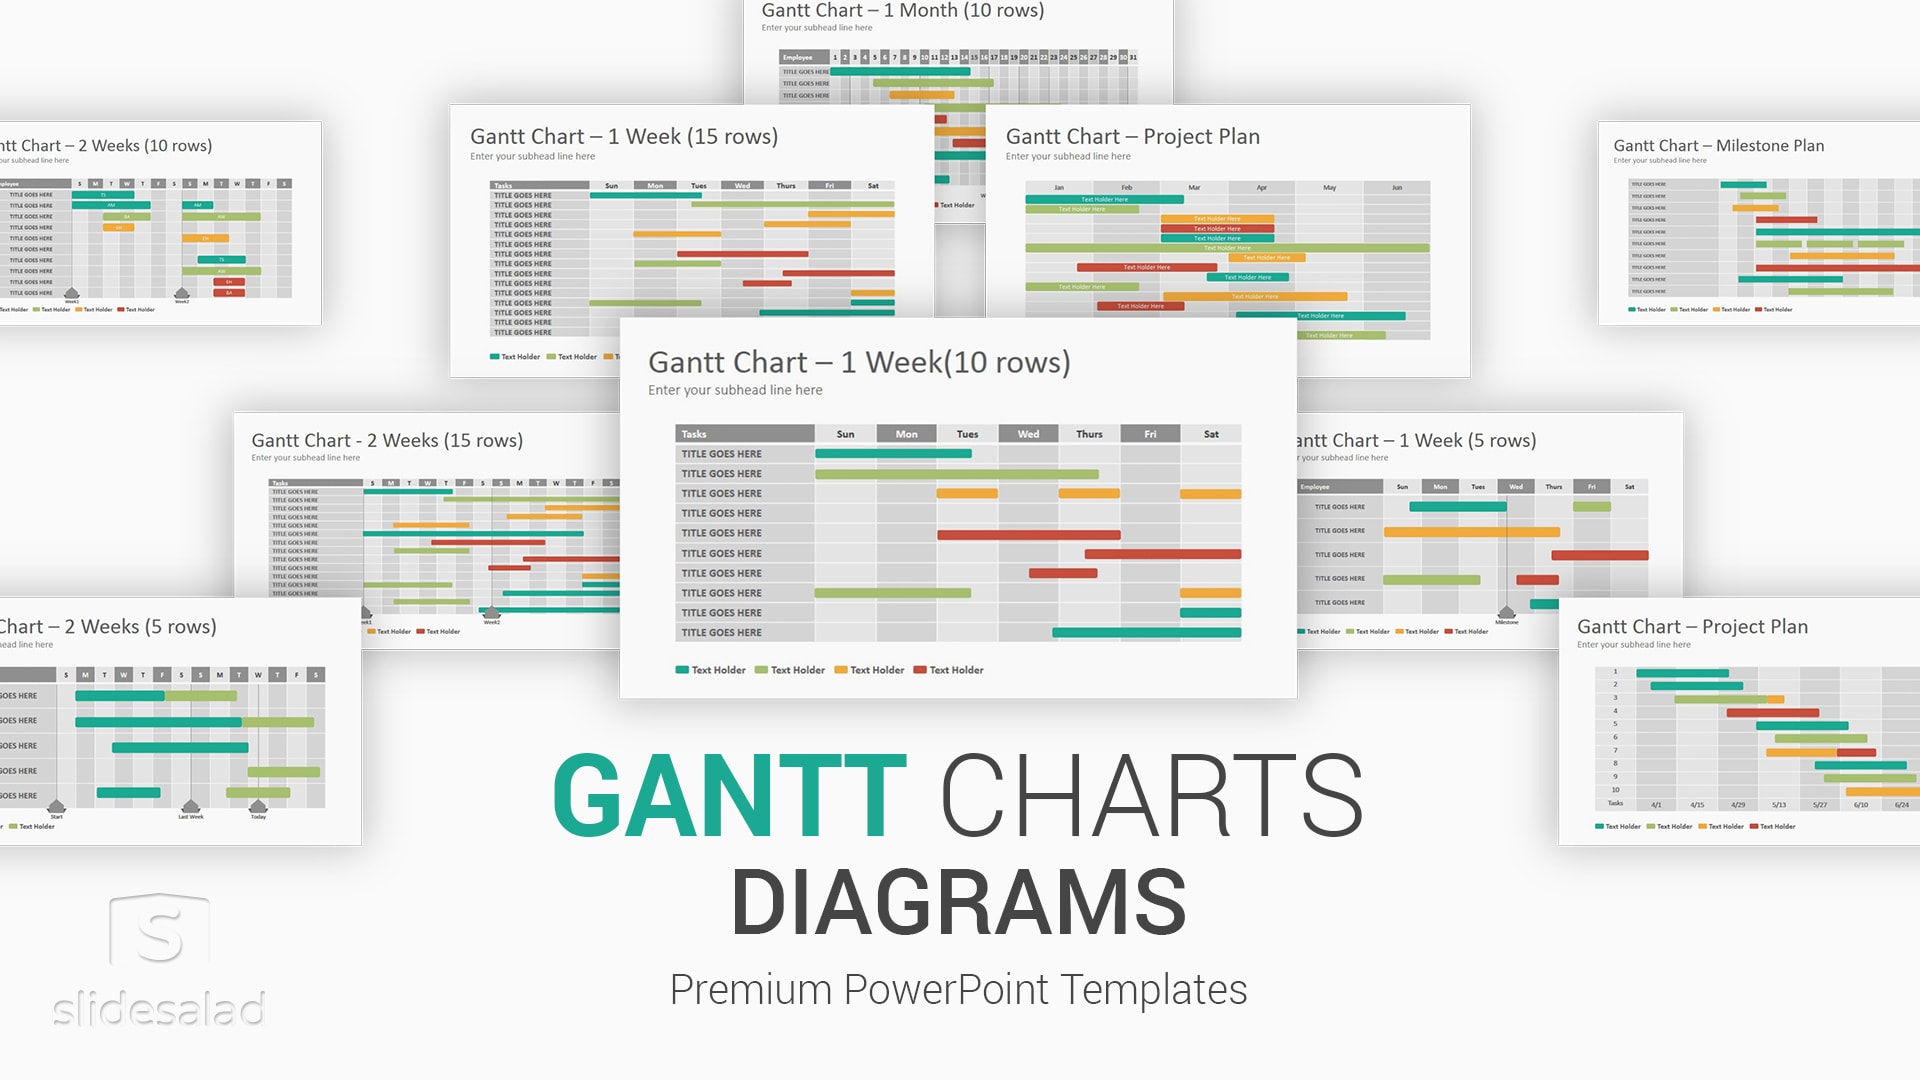 Gantt Diagrams PowerPoint Presentation Template – Ultimate Professional PowerPoint Template for Business Proposals